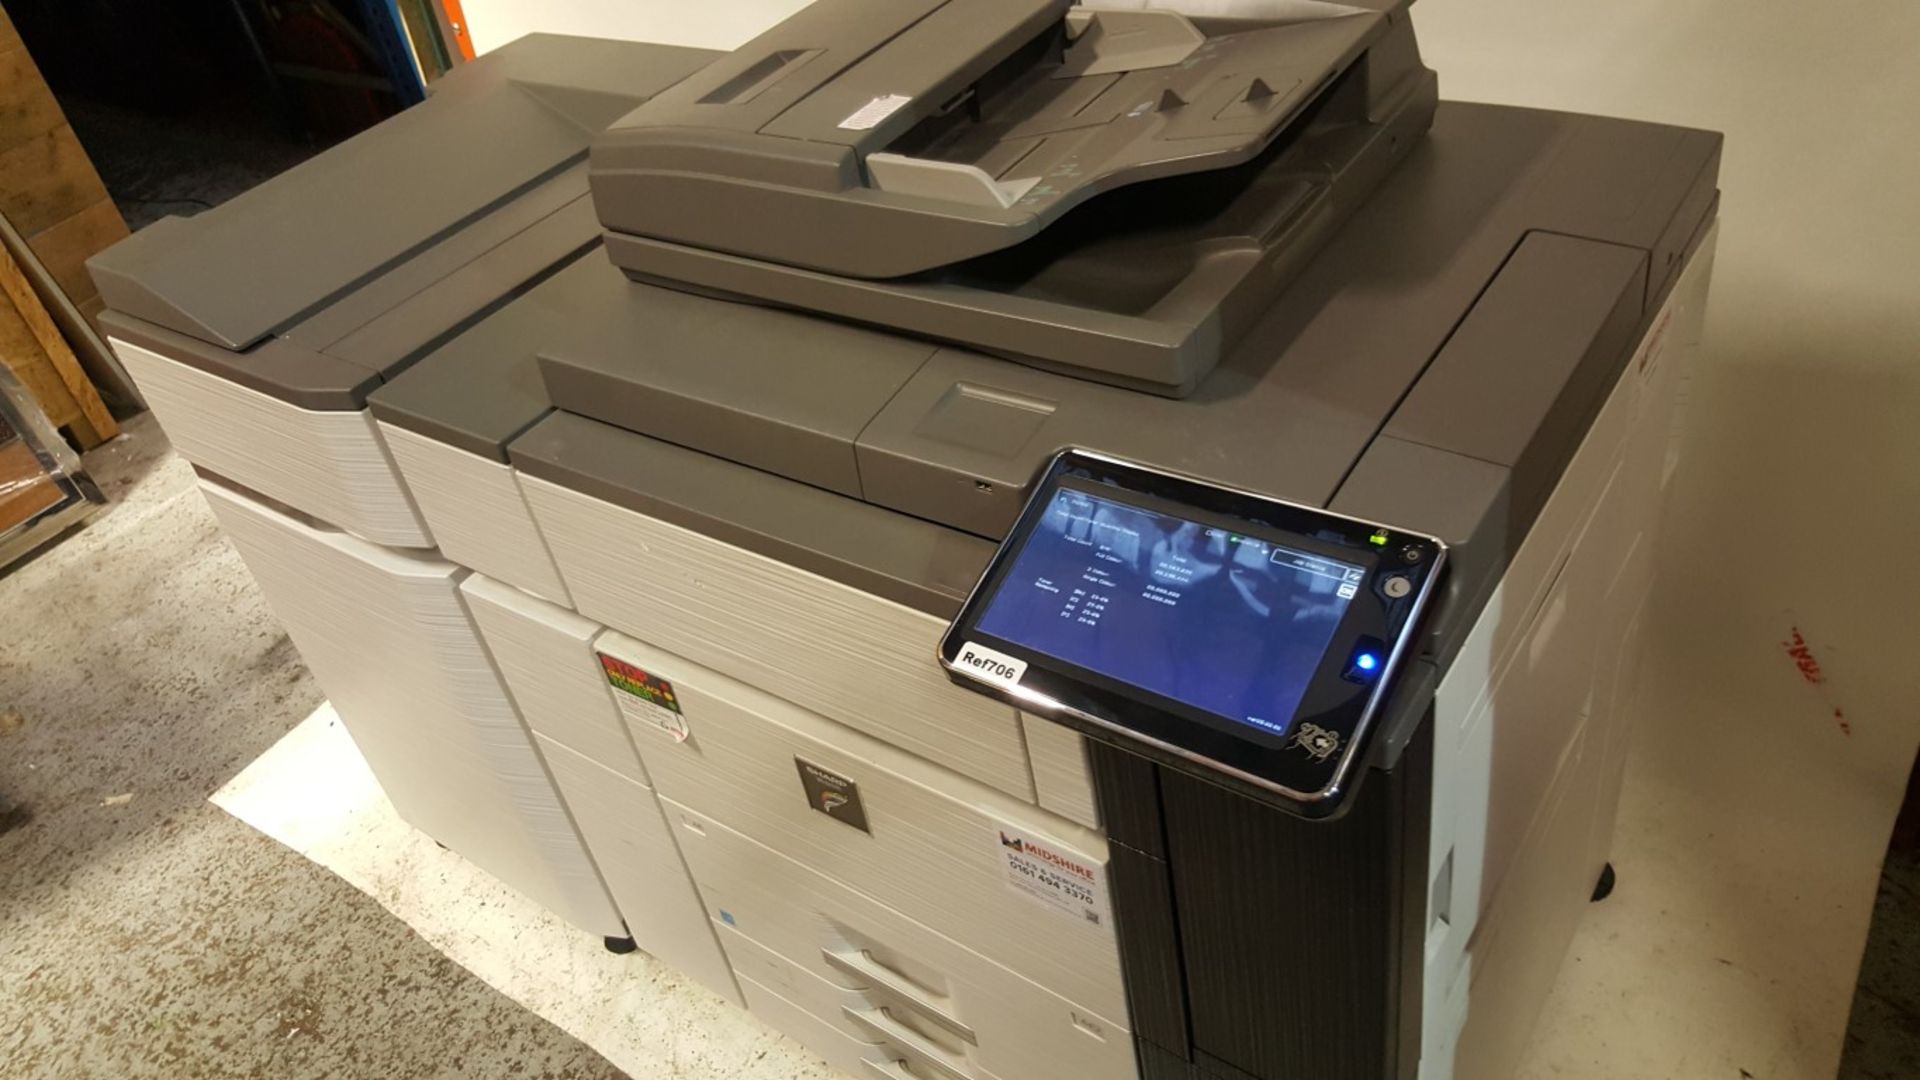 1 x Sharp MX6240N Office Printer + Saddle Stitch Finisher & Curl Correction Unit - CL452 -REF:Ref706 - Image 2 of 9